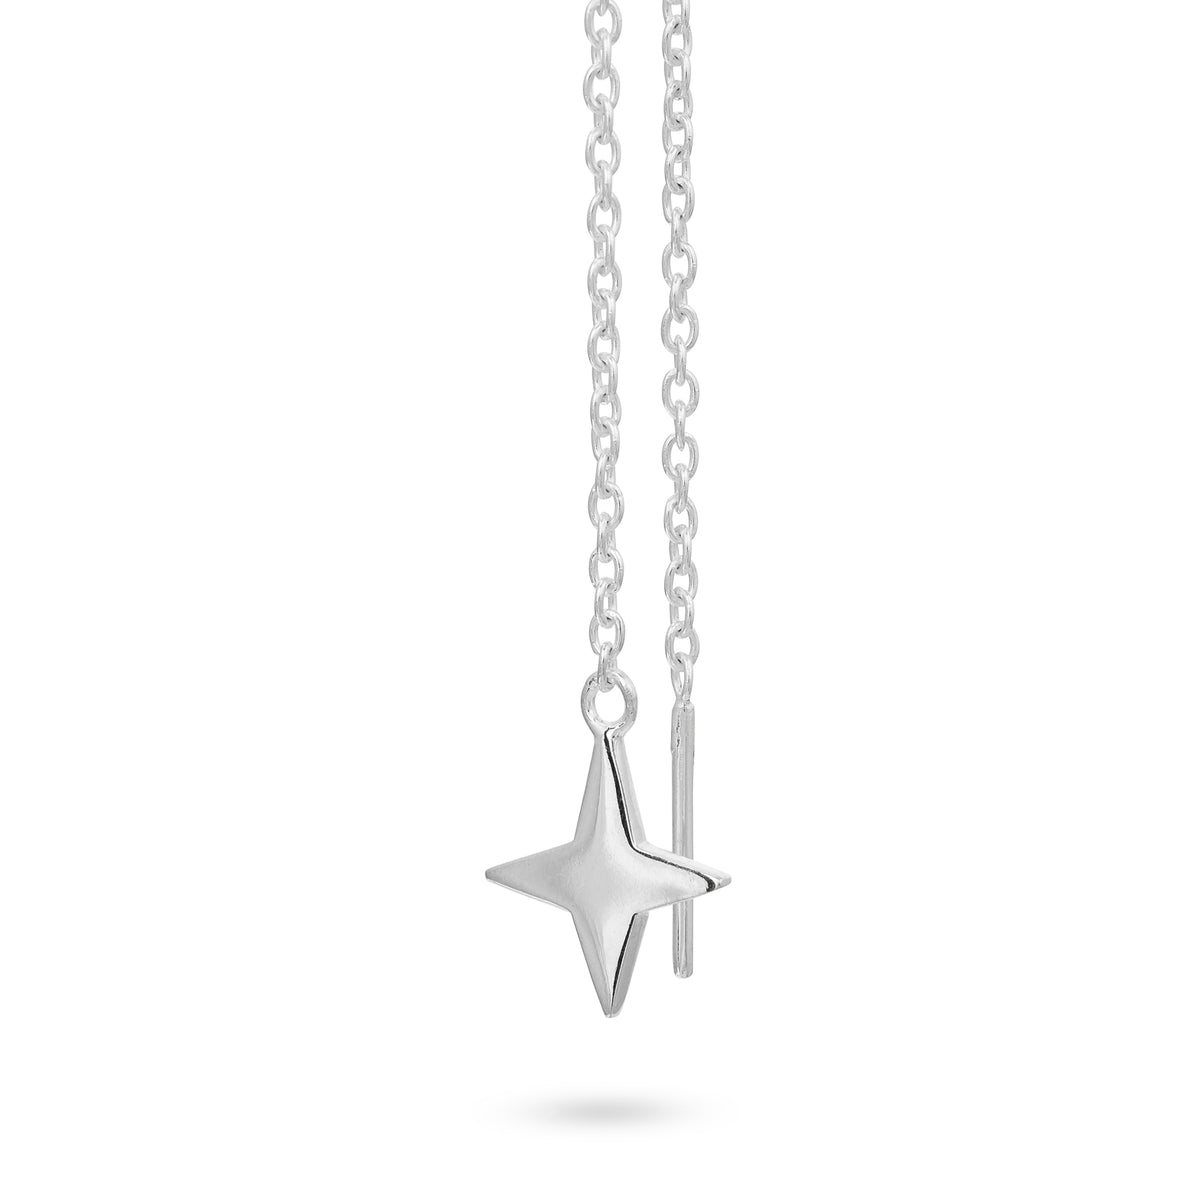 VIKA jewels floating star earrings VOYAGE EXTRAORDINAIRE COLLECTION 5CM LONG LINK CHAIN WITH A 1.5CM STAR PENDANT IN THE FRONT 4CM LONG LINK CHAIN IN THE BACK HALF CIRCLE TUBE FOR THE EARLOBE 925 recycled sterling silver